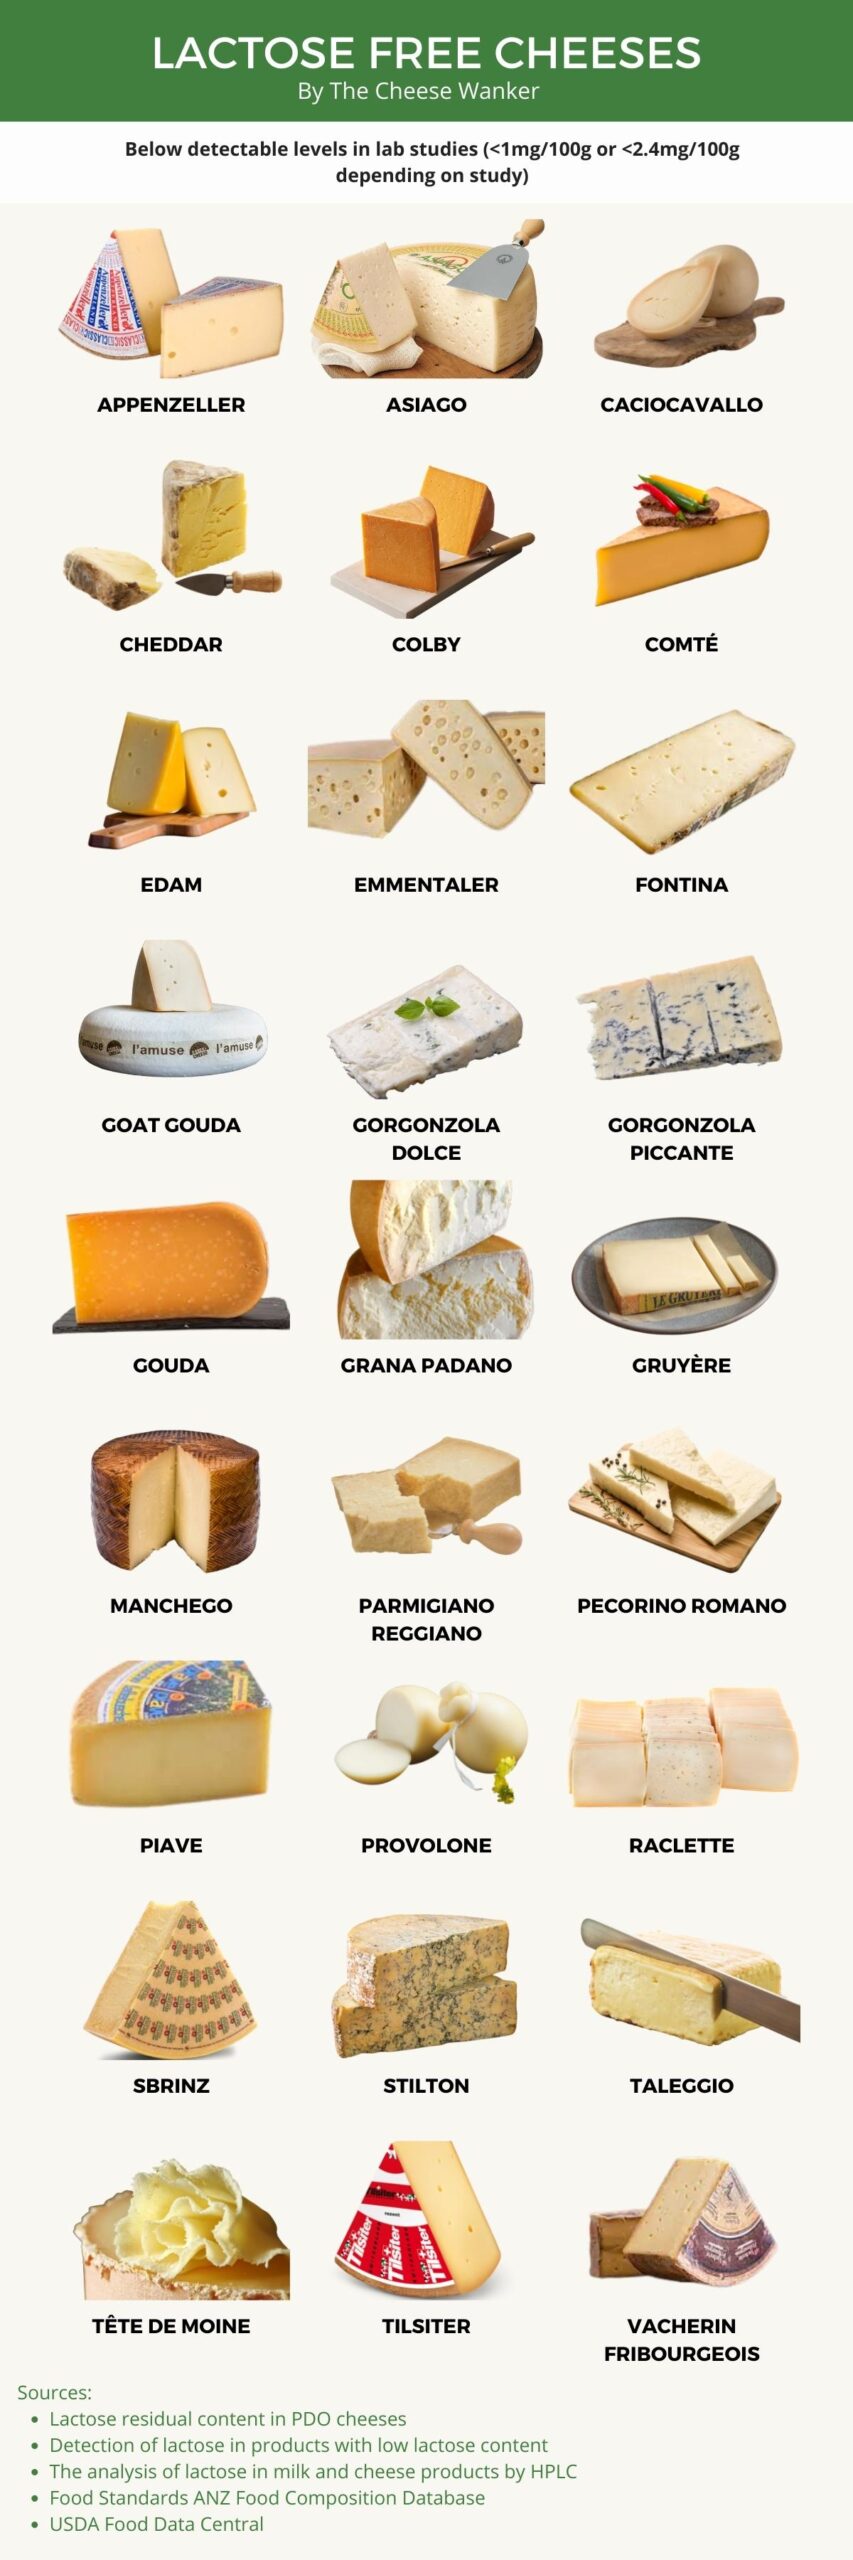 What Types of Cheese Are Lactose Free? (Lab Test Results)